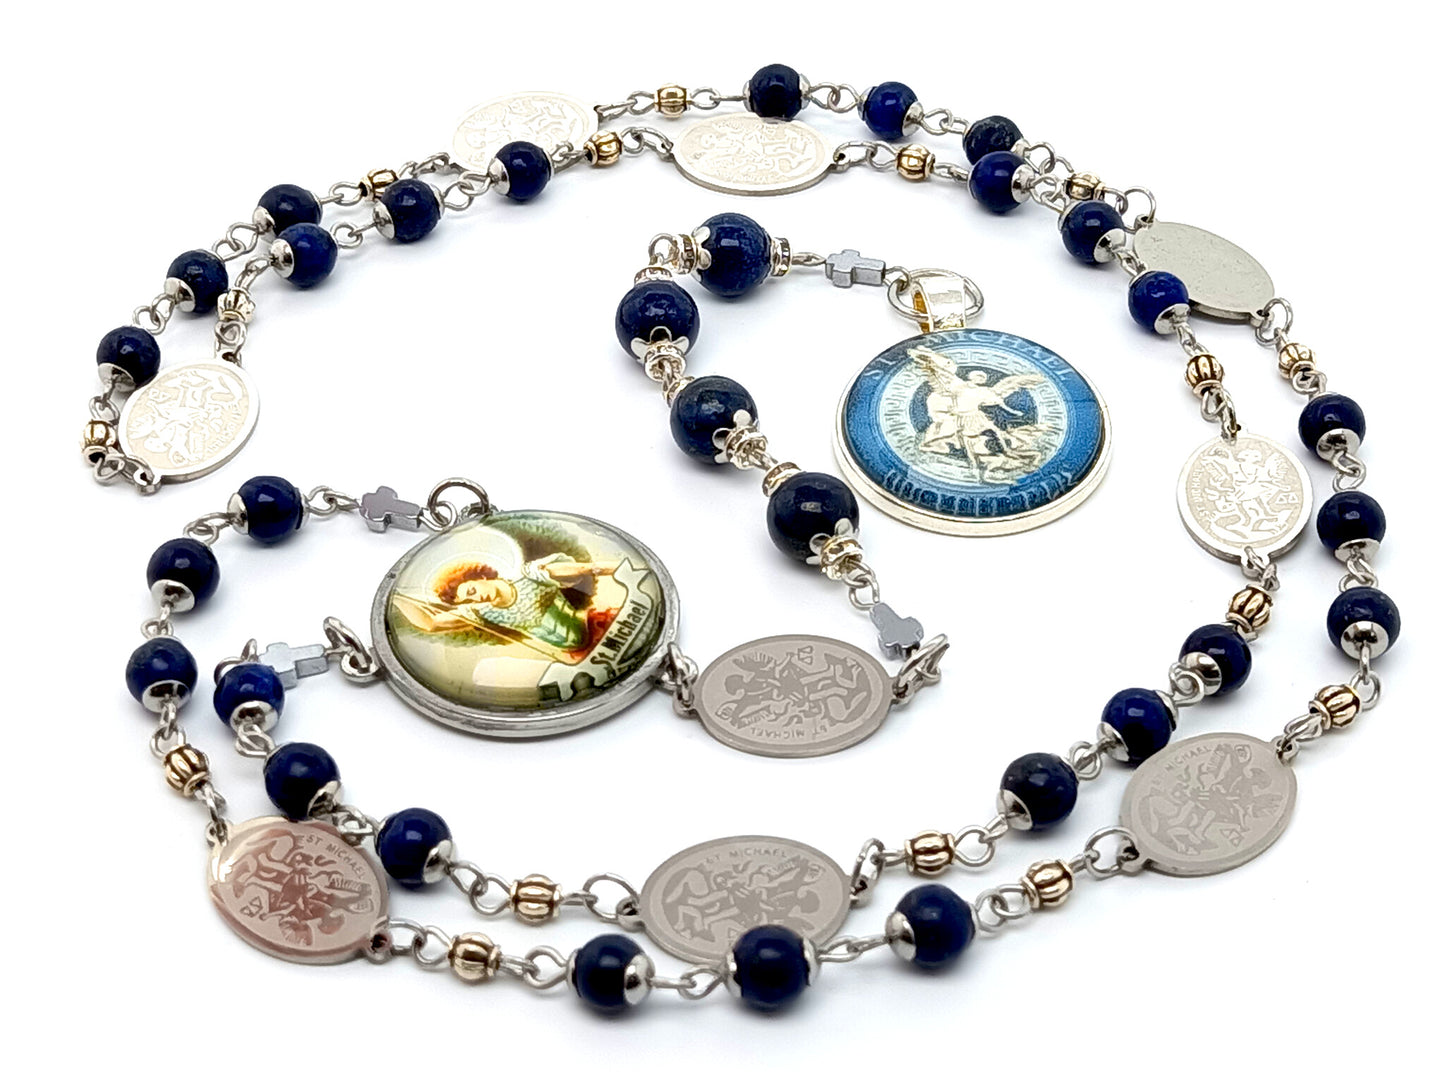 Saint Michael unique rosary beads prayer chaplet with lapis lazuli gemstone beads, stainless steel etched Saint Michael linking medals and picture medals.